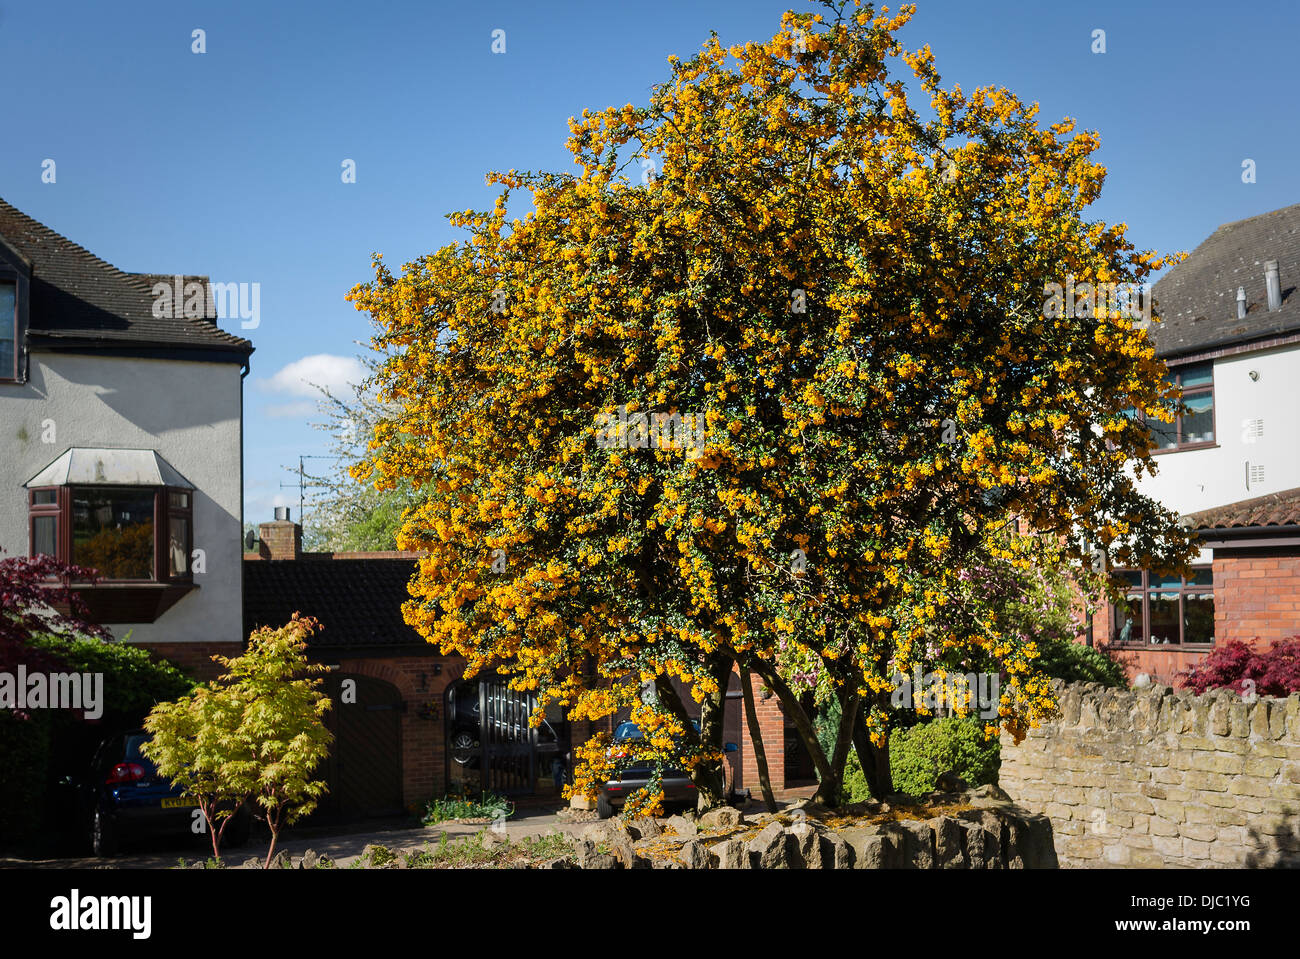 Impressive flowering shrub, probably Berberis, grown as a tree in a front garden feature UK Stock Photo